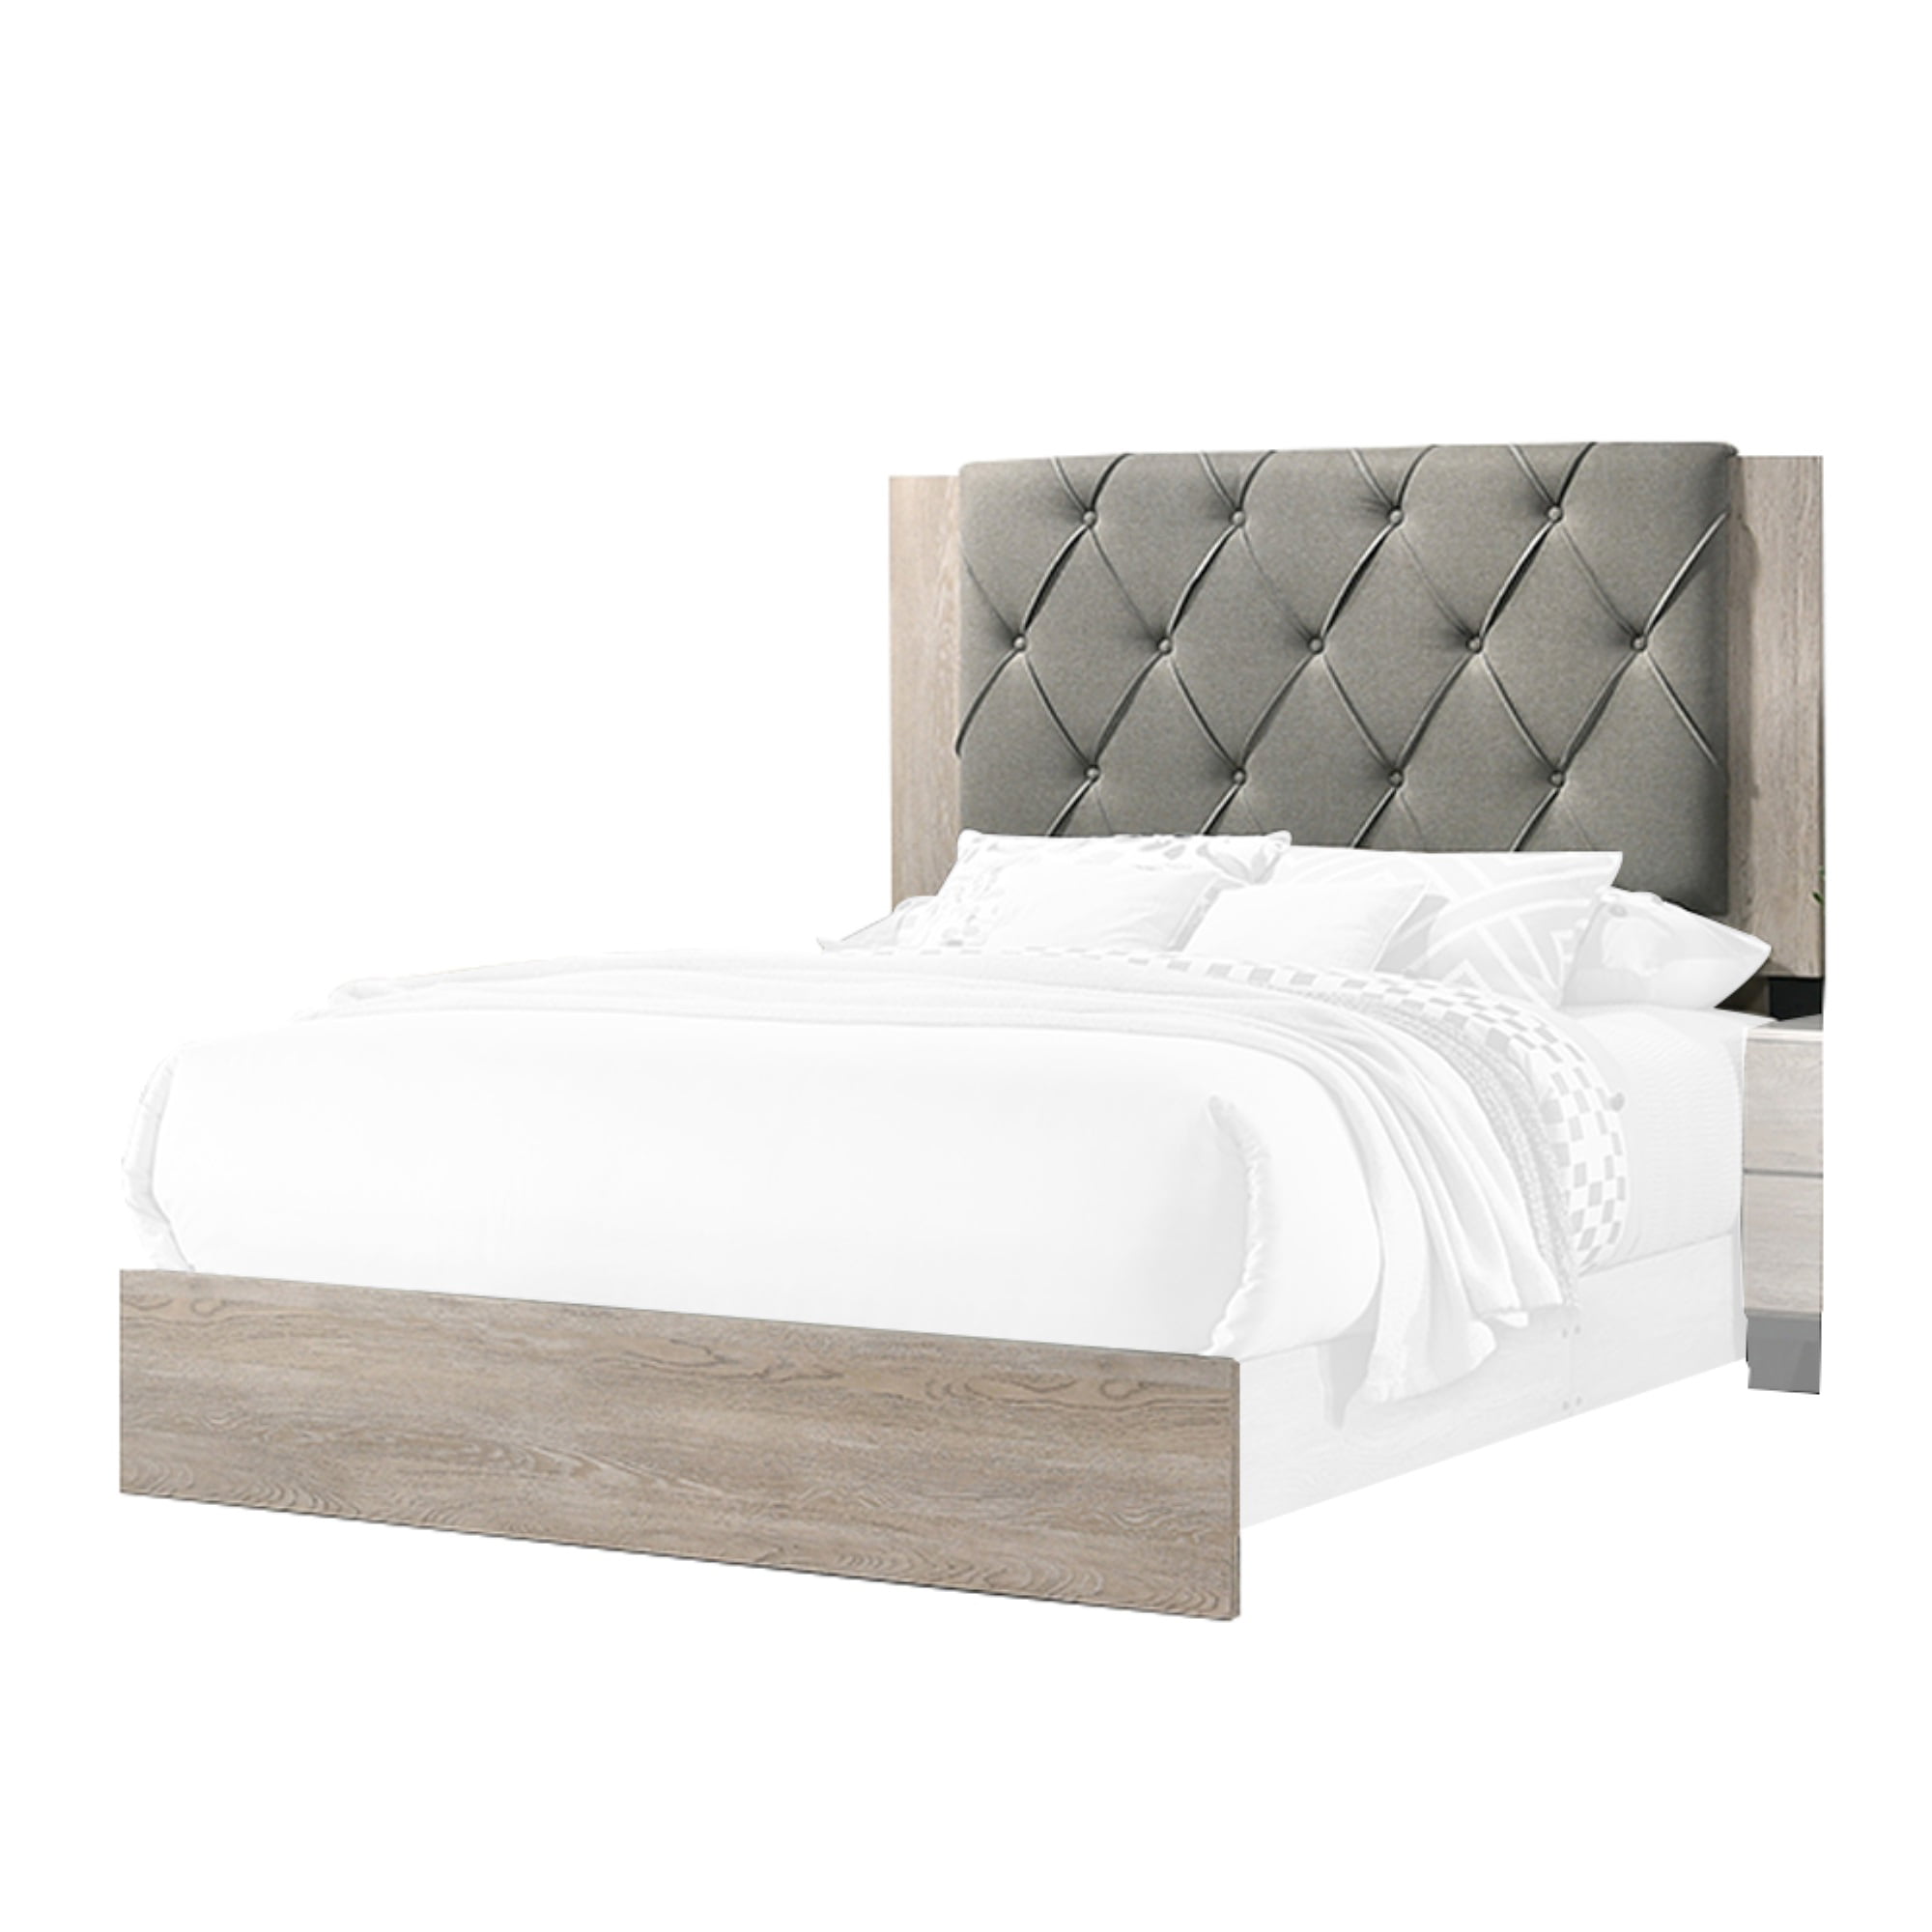 Gray/White Twin Full Queen King Size Upholstered Headboard Bedroom Furniture 